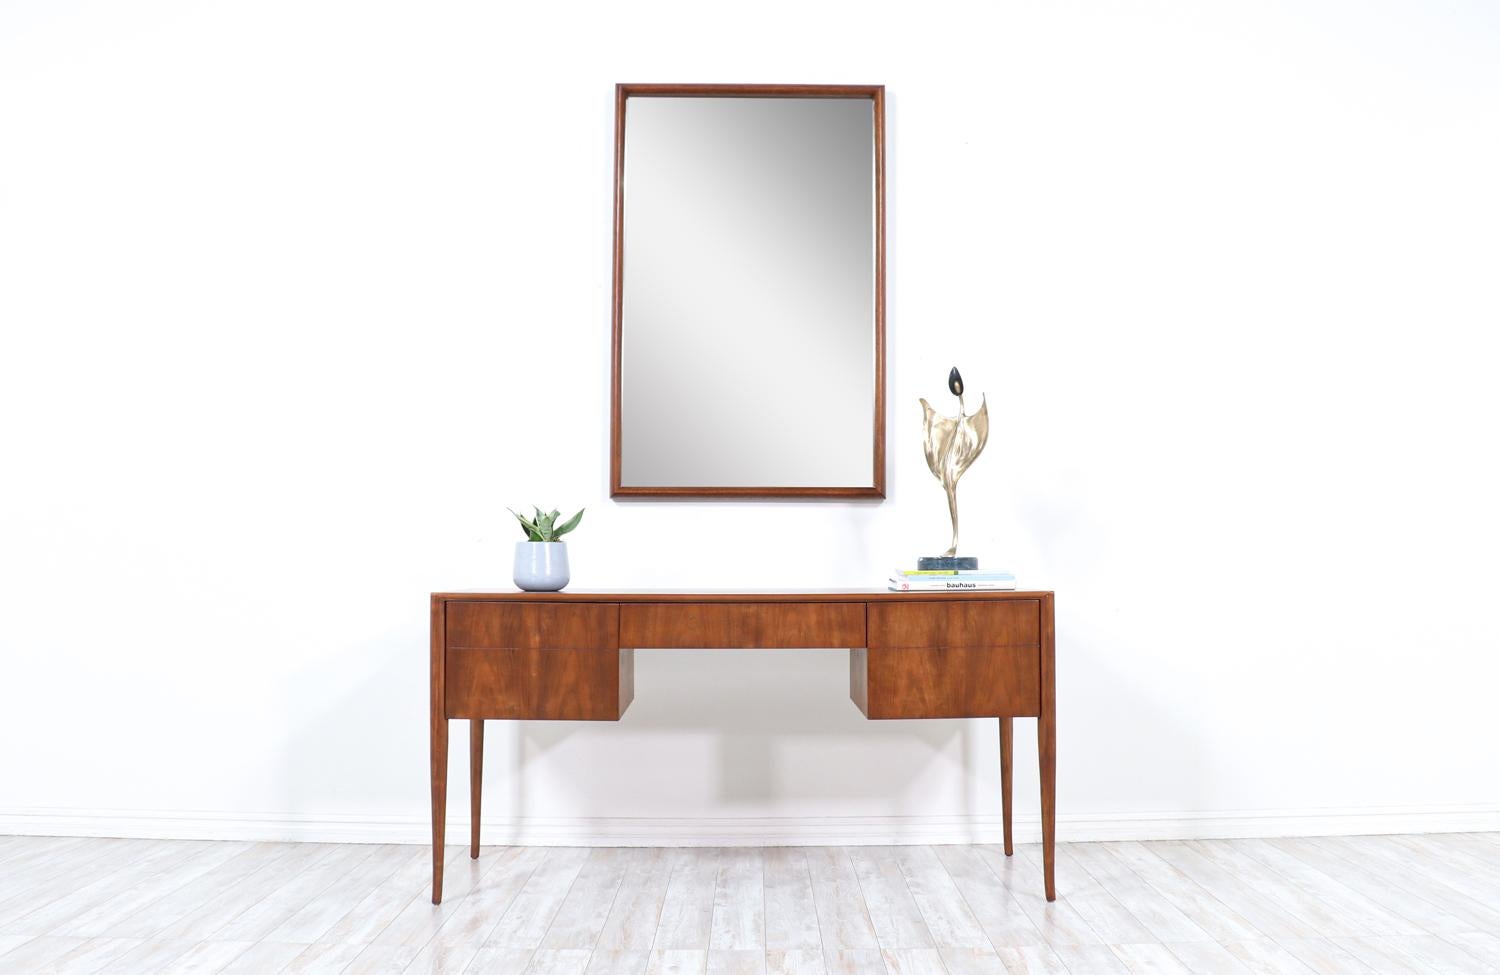 John Keal wall-hanging sculpted mirror for Brown Saltman.

________________________________________

Transforming a piece of Mid-Century Modern furniture is like bringing history back to life, and we take this journey with passion and precision.